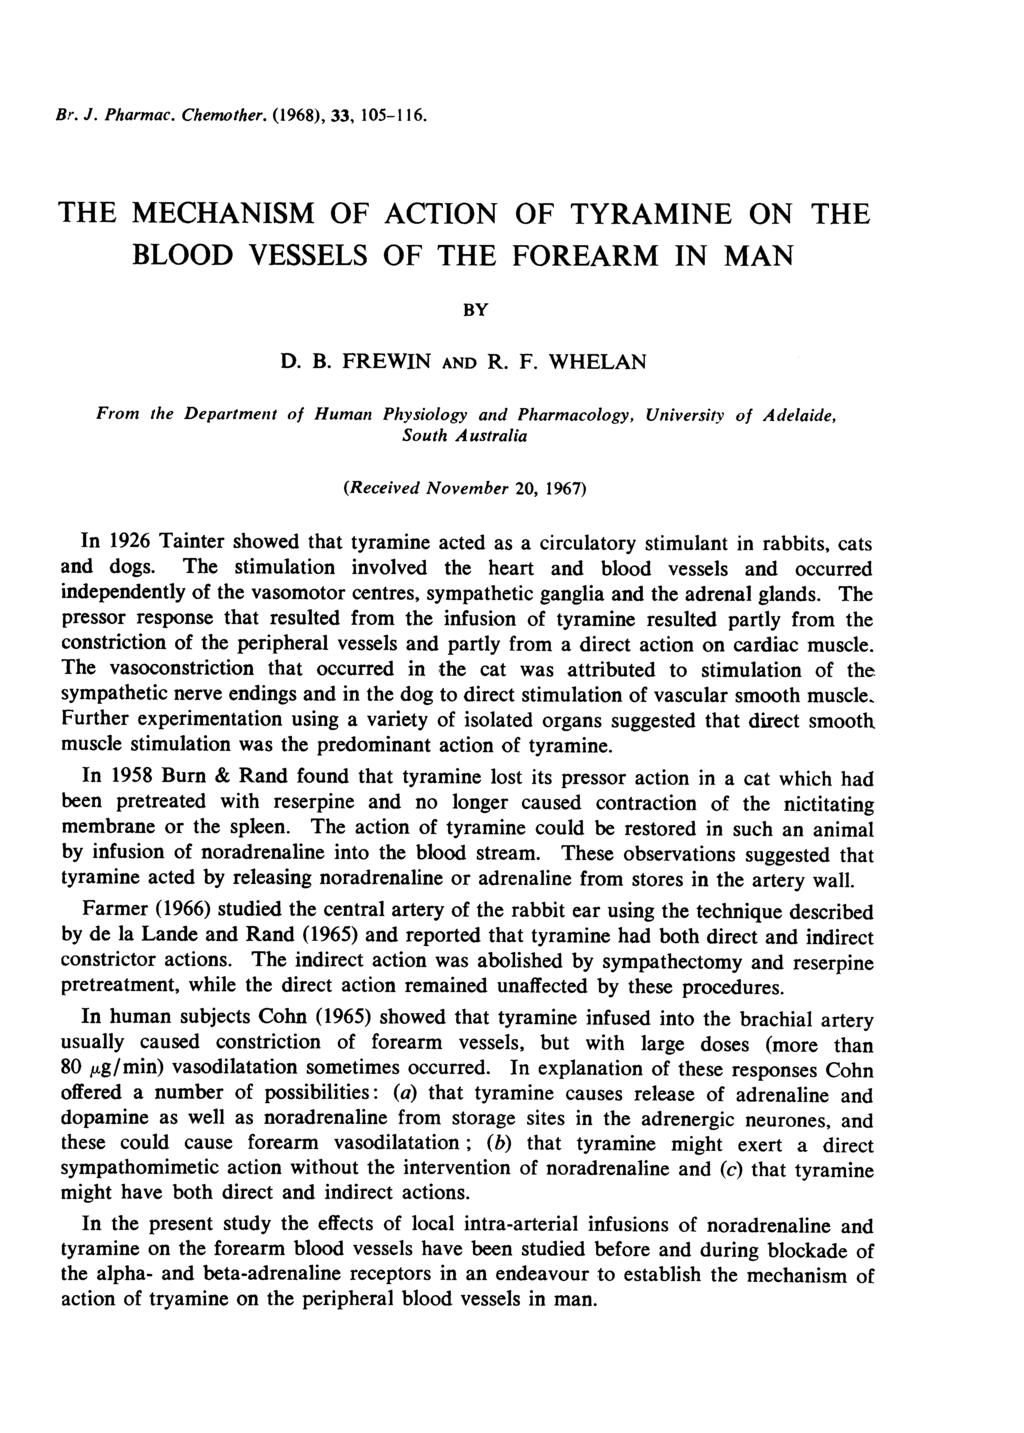 Br. J. Pharmac. Chemother. (1968), 33, 15-116. TH MCHANISM OF ACTION OF TYRAMIN ON TH BLOOD VSSLS OF TH FO